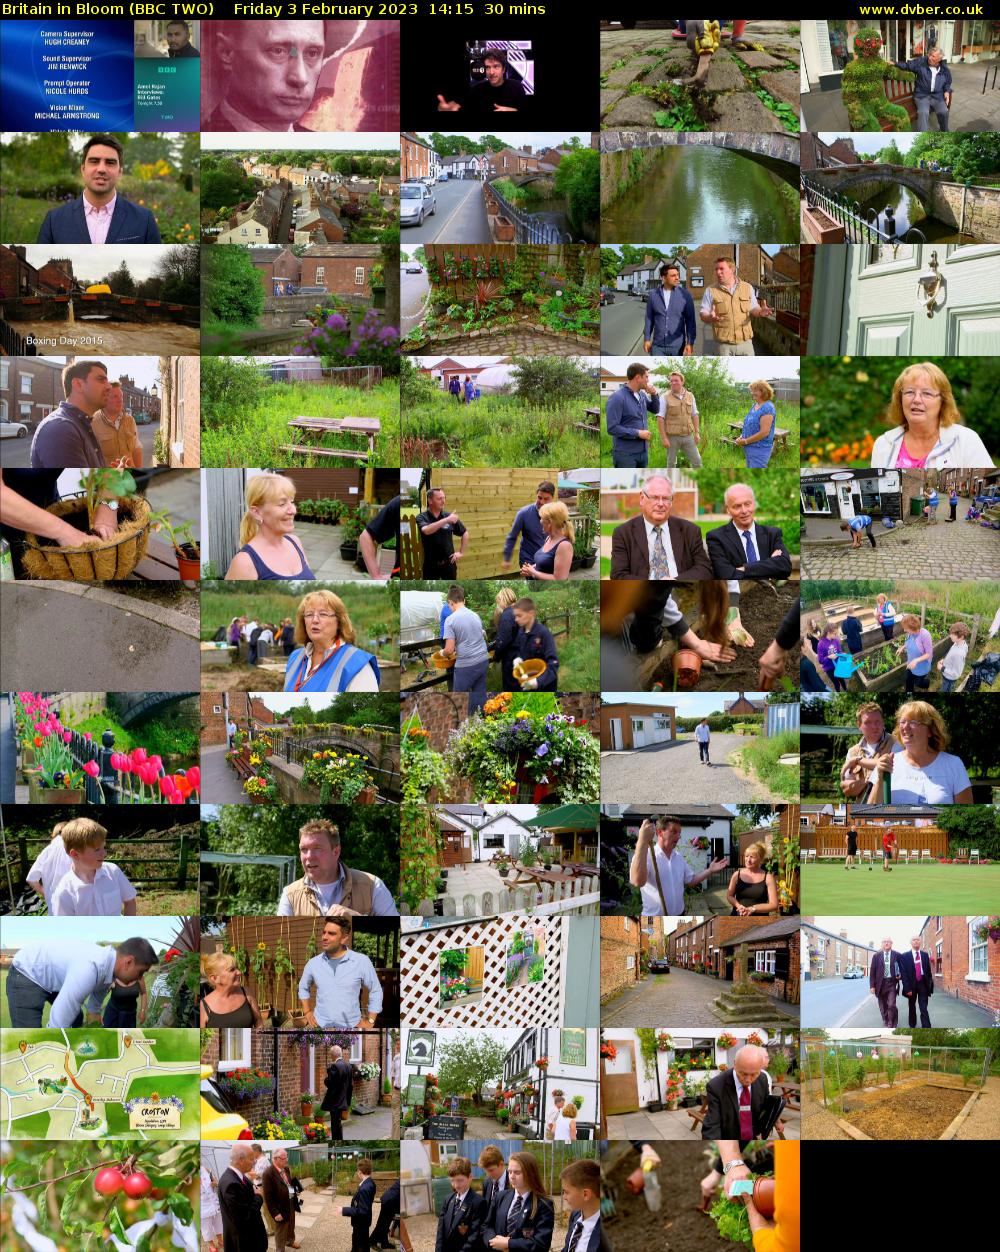 Britain in Bloom (BBC TWO) Friday 3 February 2023 14:15 - 14:45